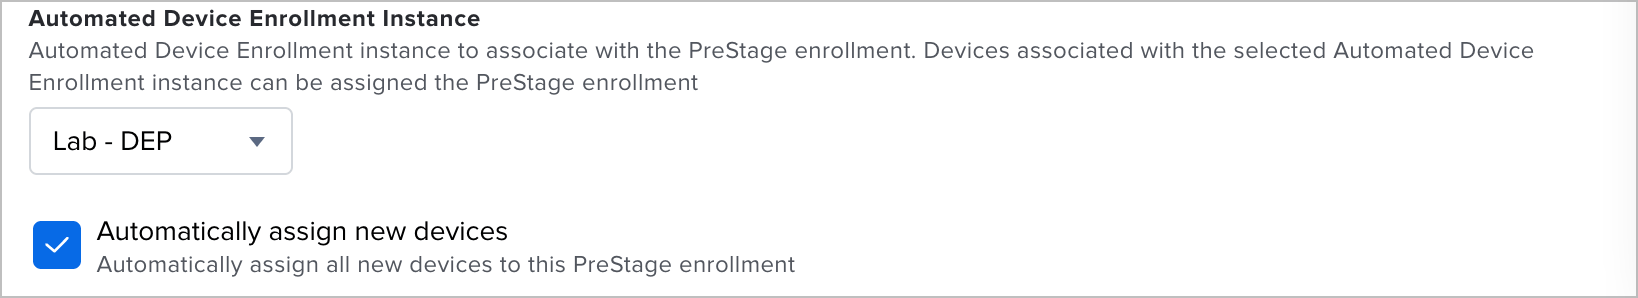 A screenshot from Jamf Pro PreStage settings showing that the enrollment instance is set to Lab - DEP, and the automatically assign new devices option is checked.